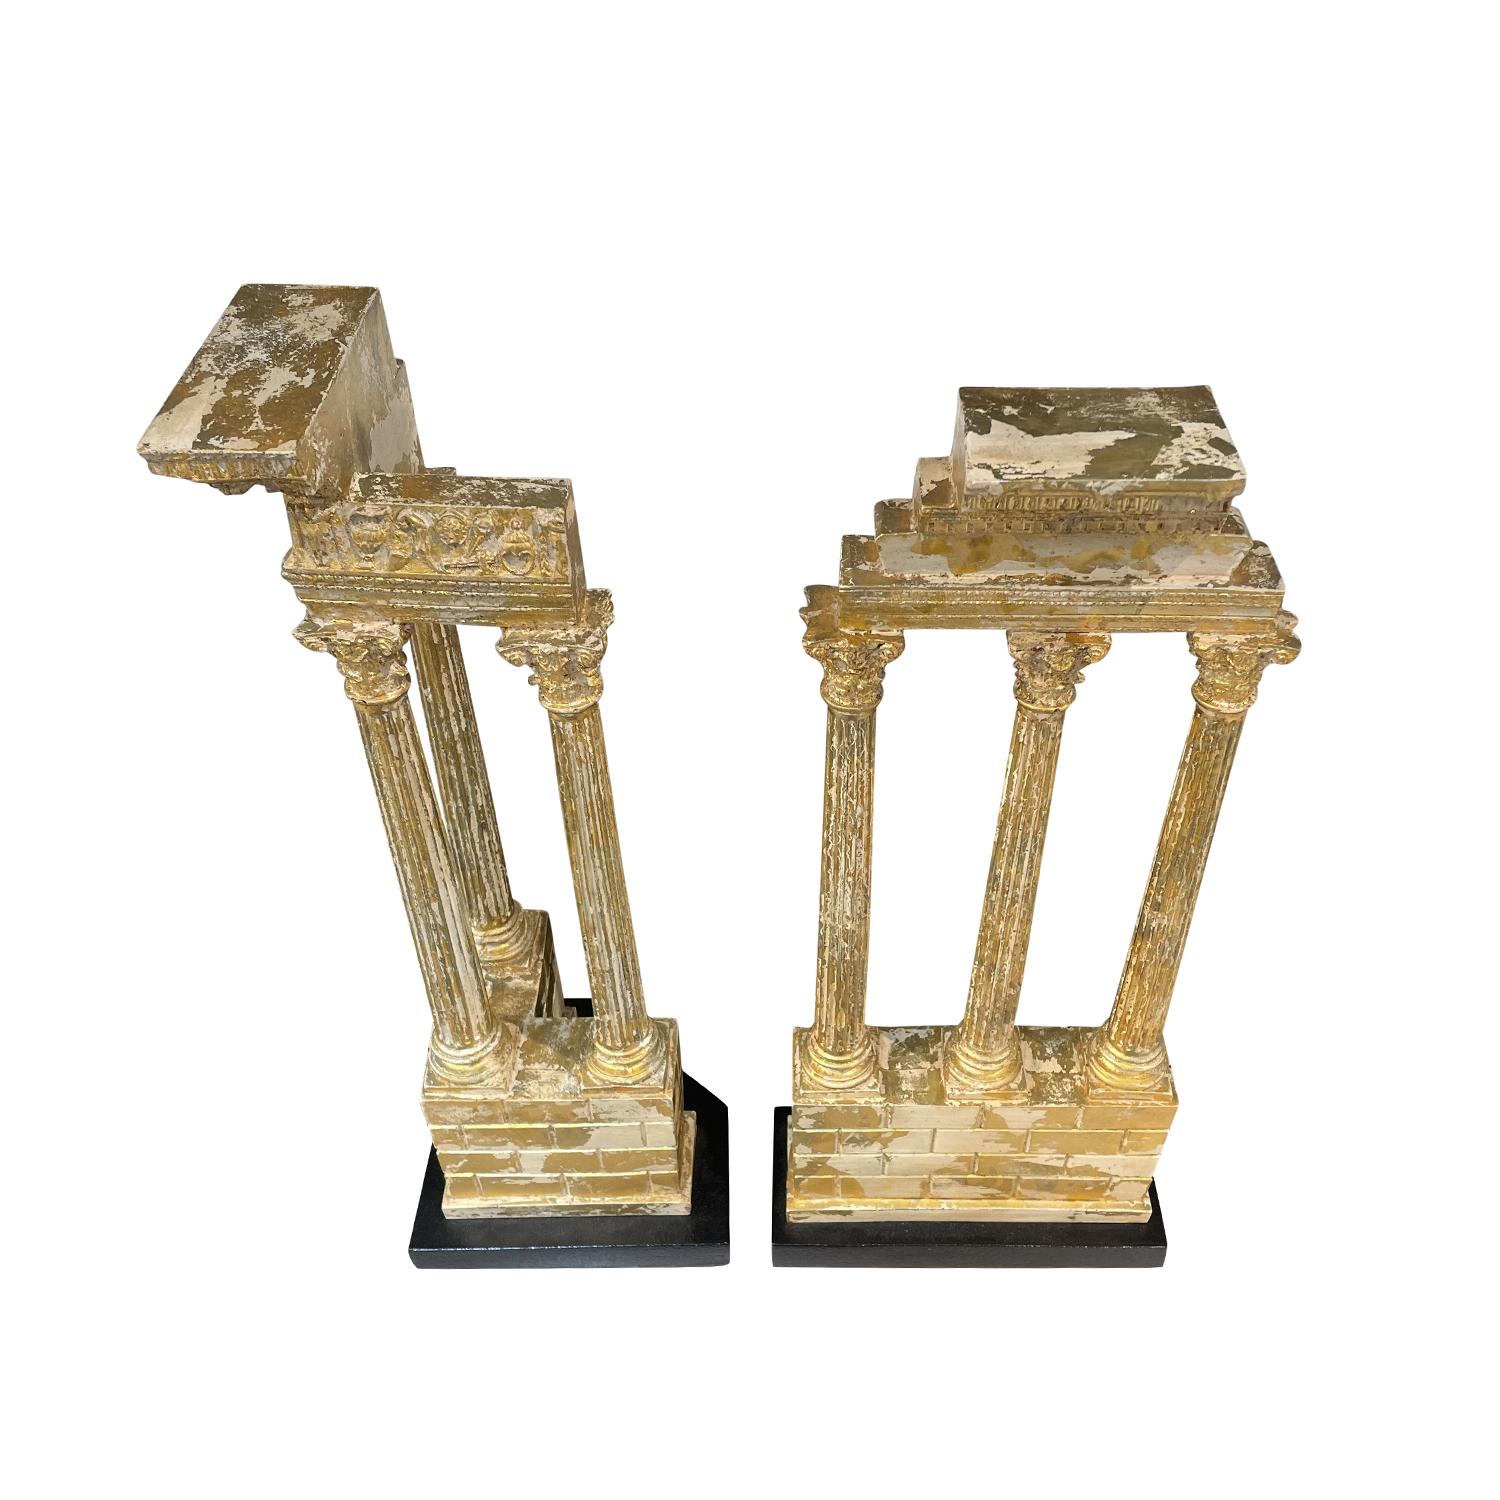 19th Century Italian Set of Antique Gilt Stone Fragments, Columns In Good Condition For Sale In West Palm Beach, FL